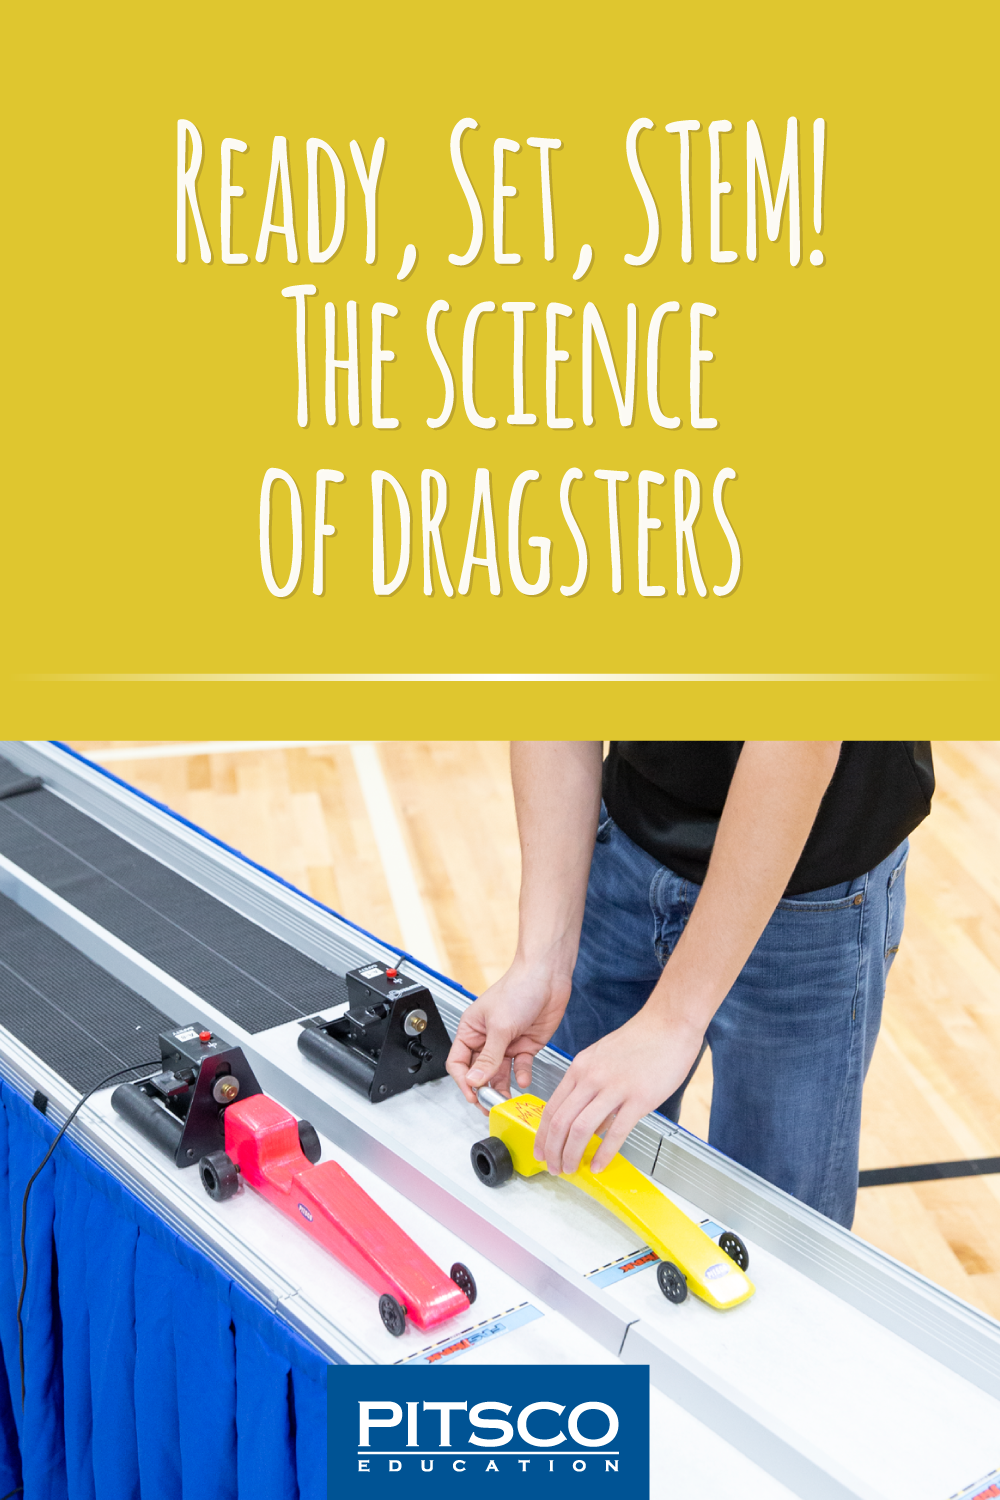 The-Science-of-Dragsters-1000-0621